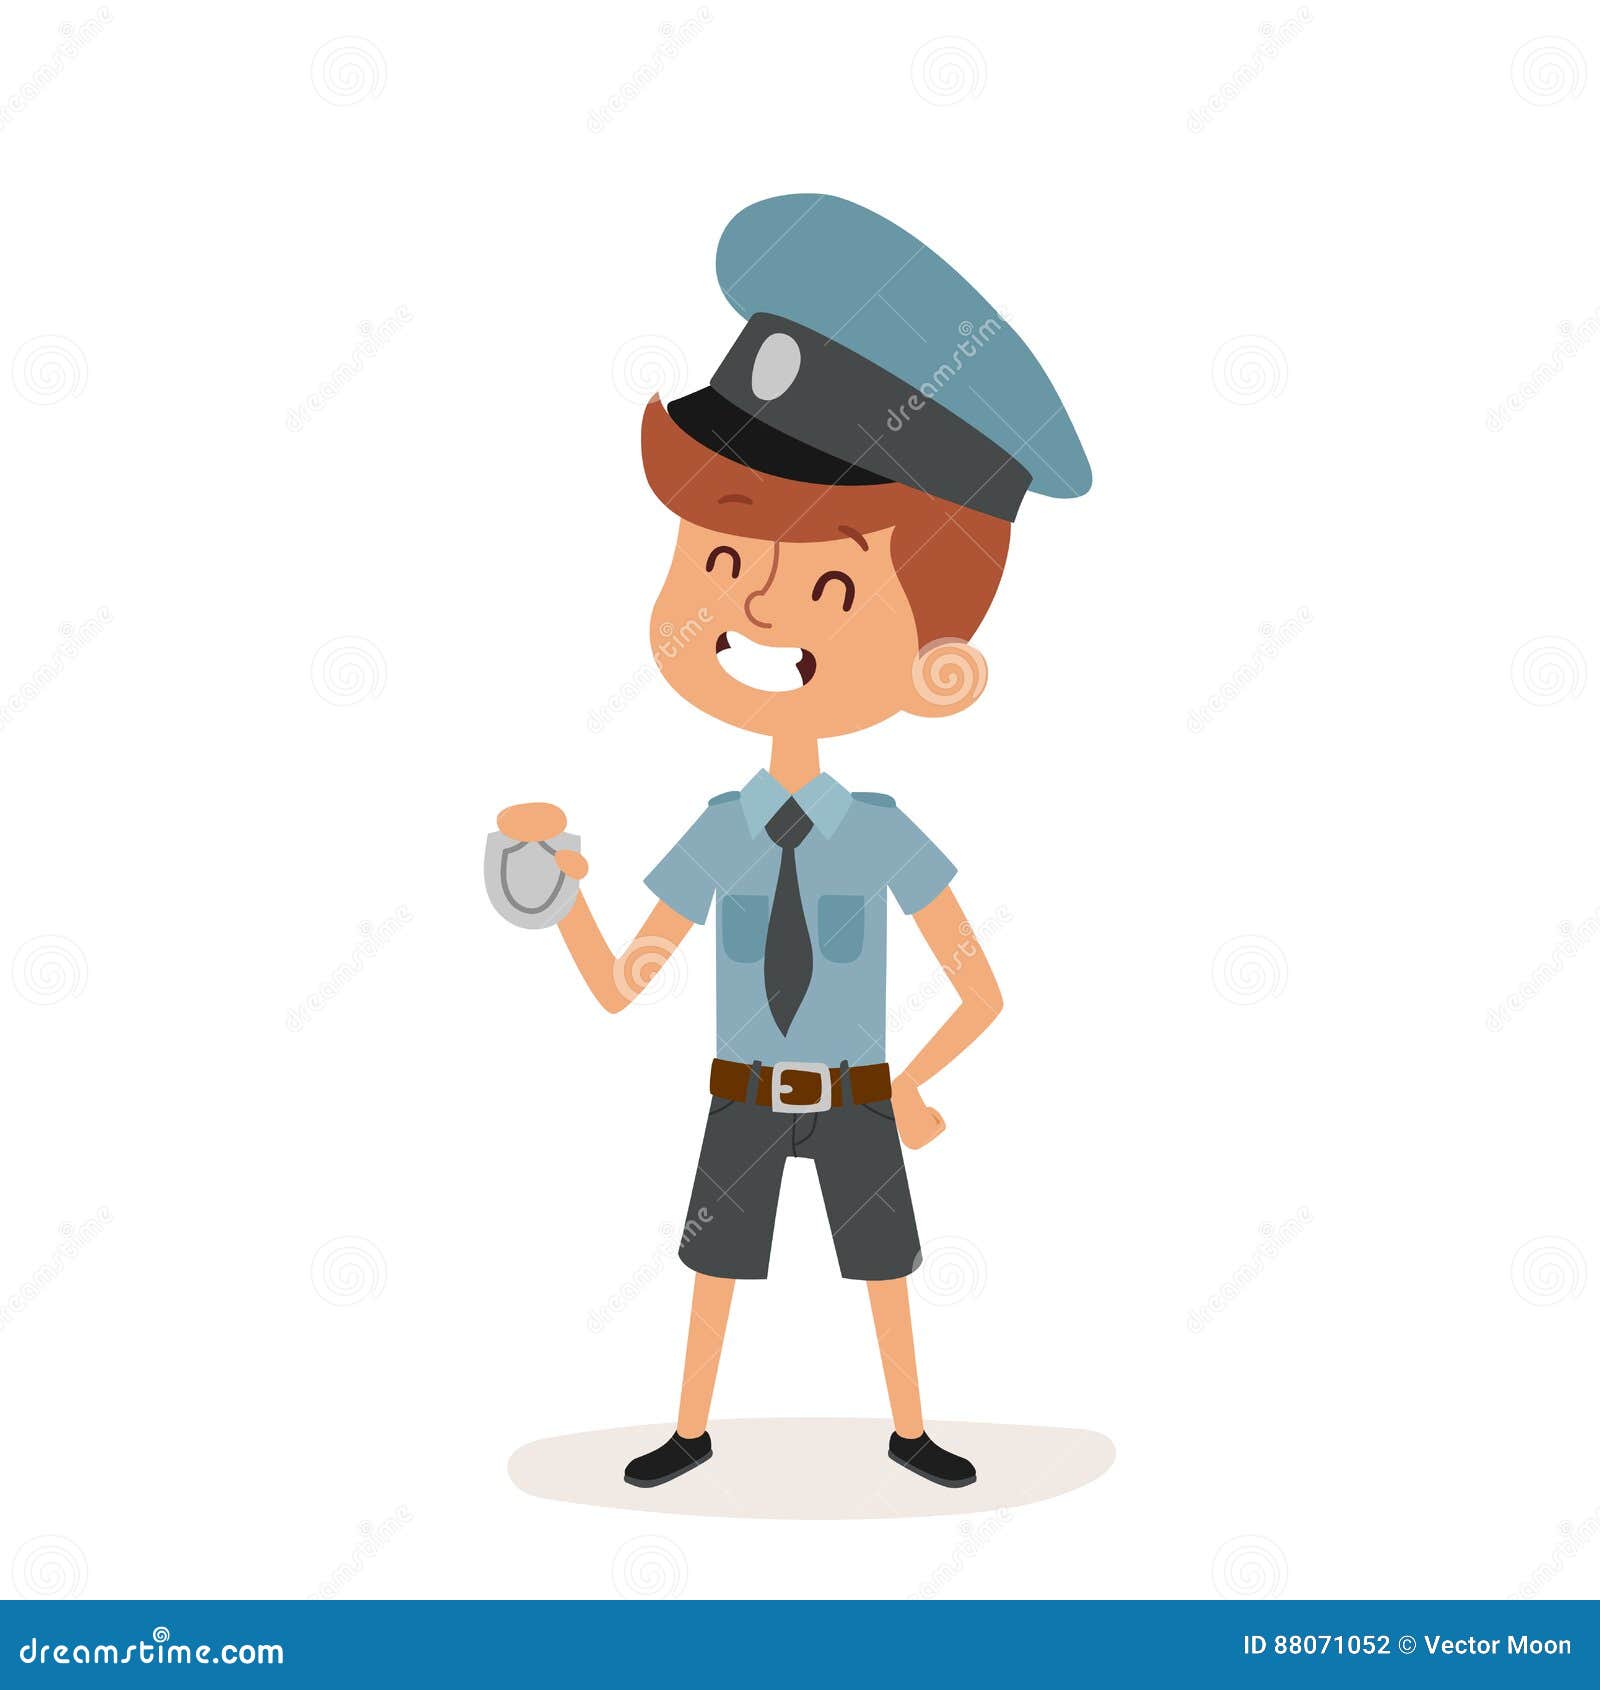 Policeman boy cap and badge hands cop cartoon character person on white background vector profession uniform worker. Cute cartoon profession police boy and police funny cartoon kid. Boy police man in police uniform, cap and badge hands cop occupation security job. Cute cartoon character of policeman boy vector.